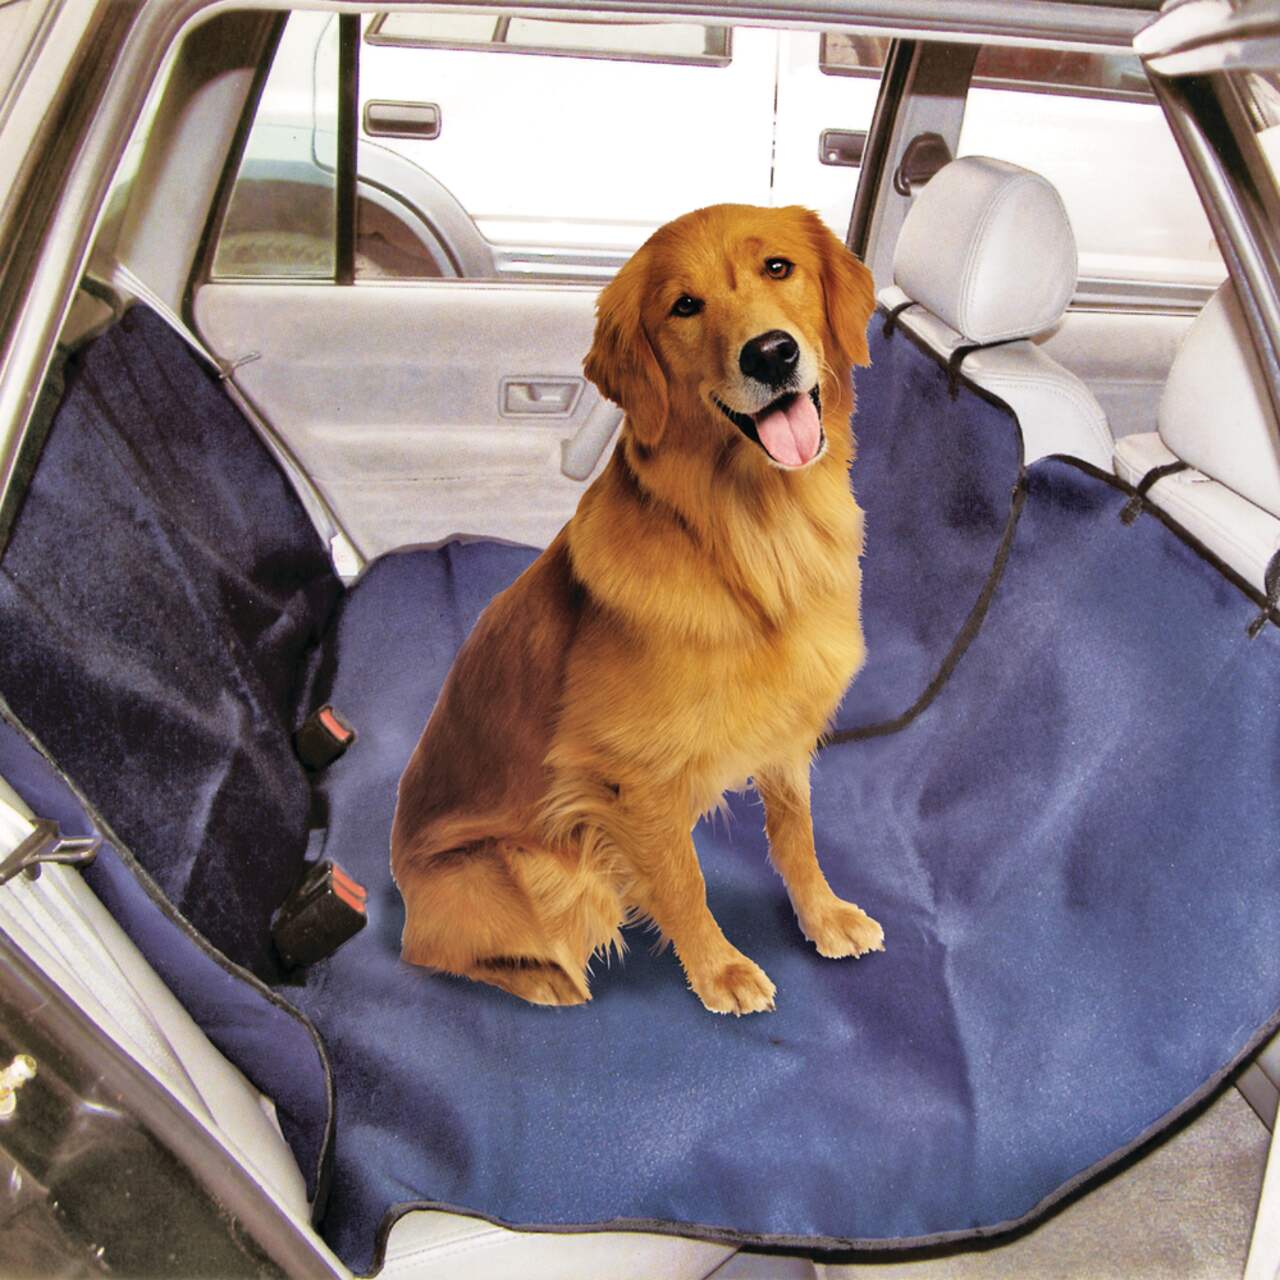 https://media-www.canadiantire.ca/product/living/pet-care/pet-accessories/1420688/car-seat-cover-10dbc0a3-ce6f-4b68-8c70-84fb2fea1558.png?imdensity=1&imwidth=1244&impolicy=mZoom